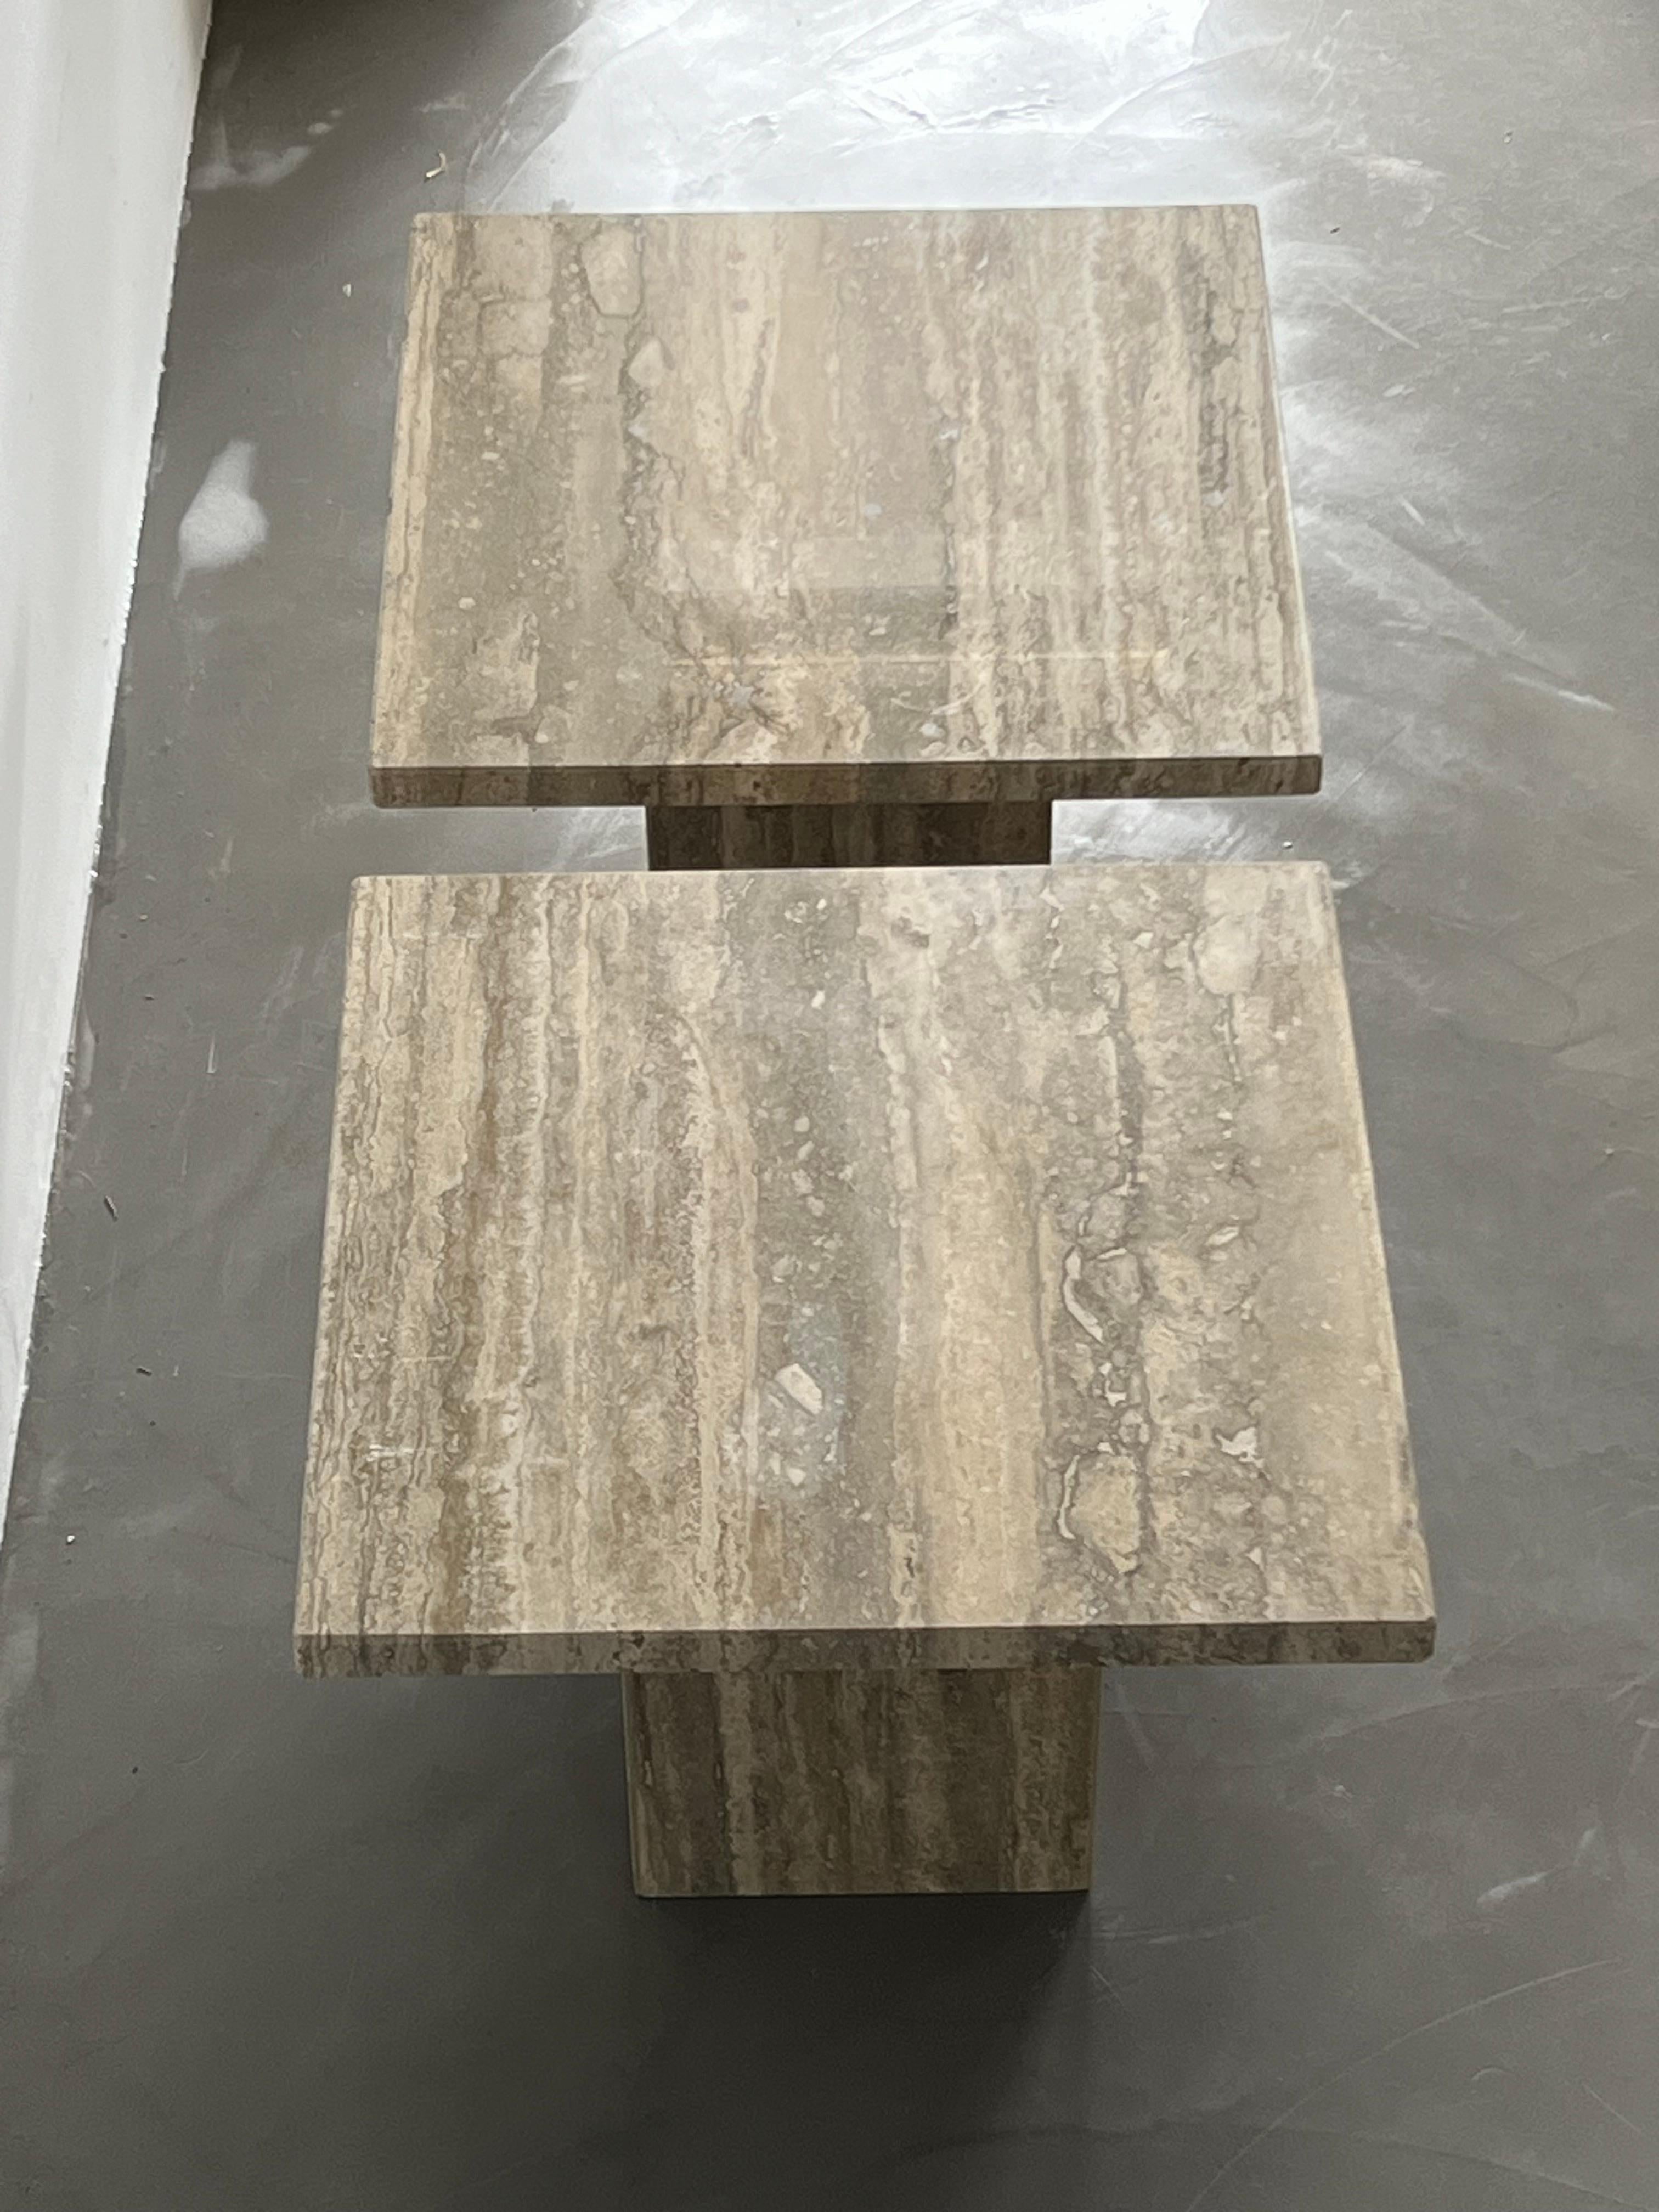 Set of Two Mid-Century Modern Side Tables in Travertine, Urban Wabi Style, Pair For Sale 1